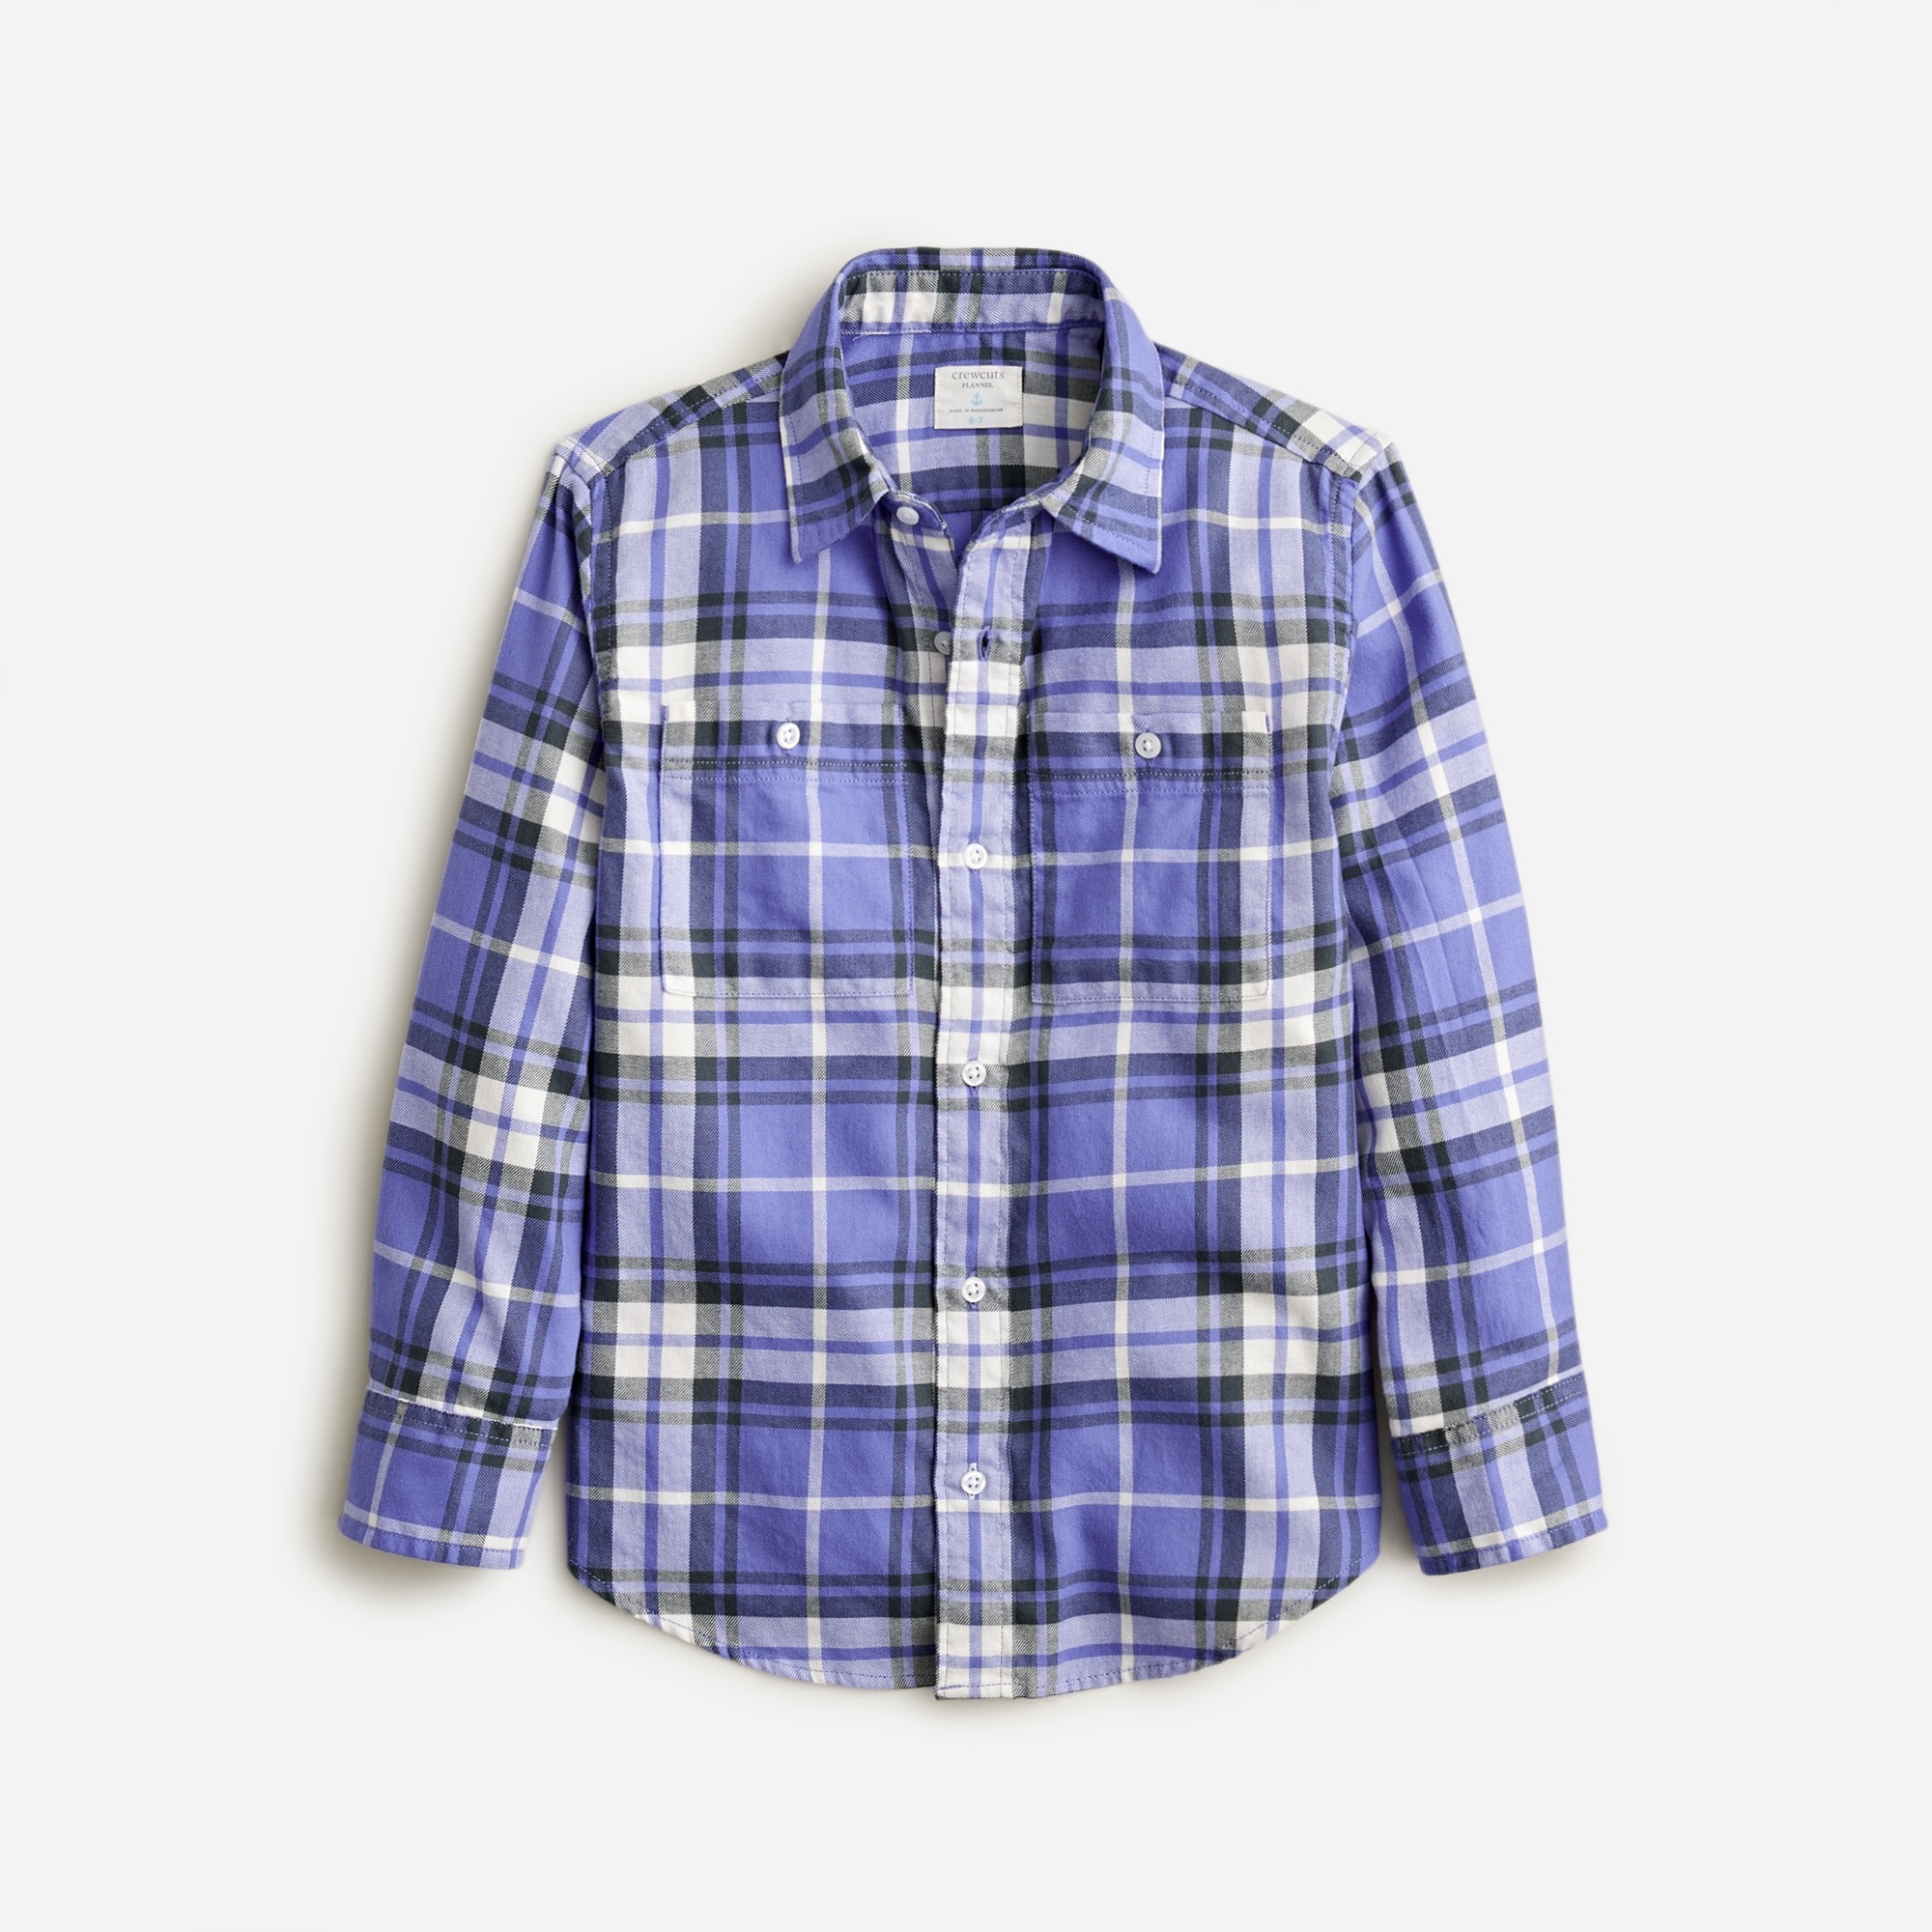  Kids' relaxed-fit shirt in lightweight flannel